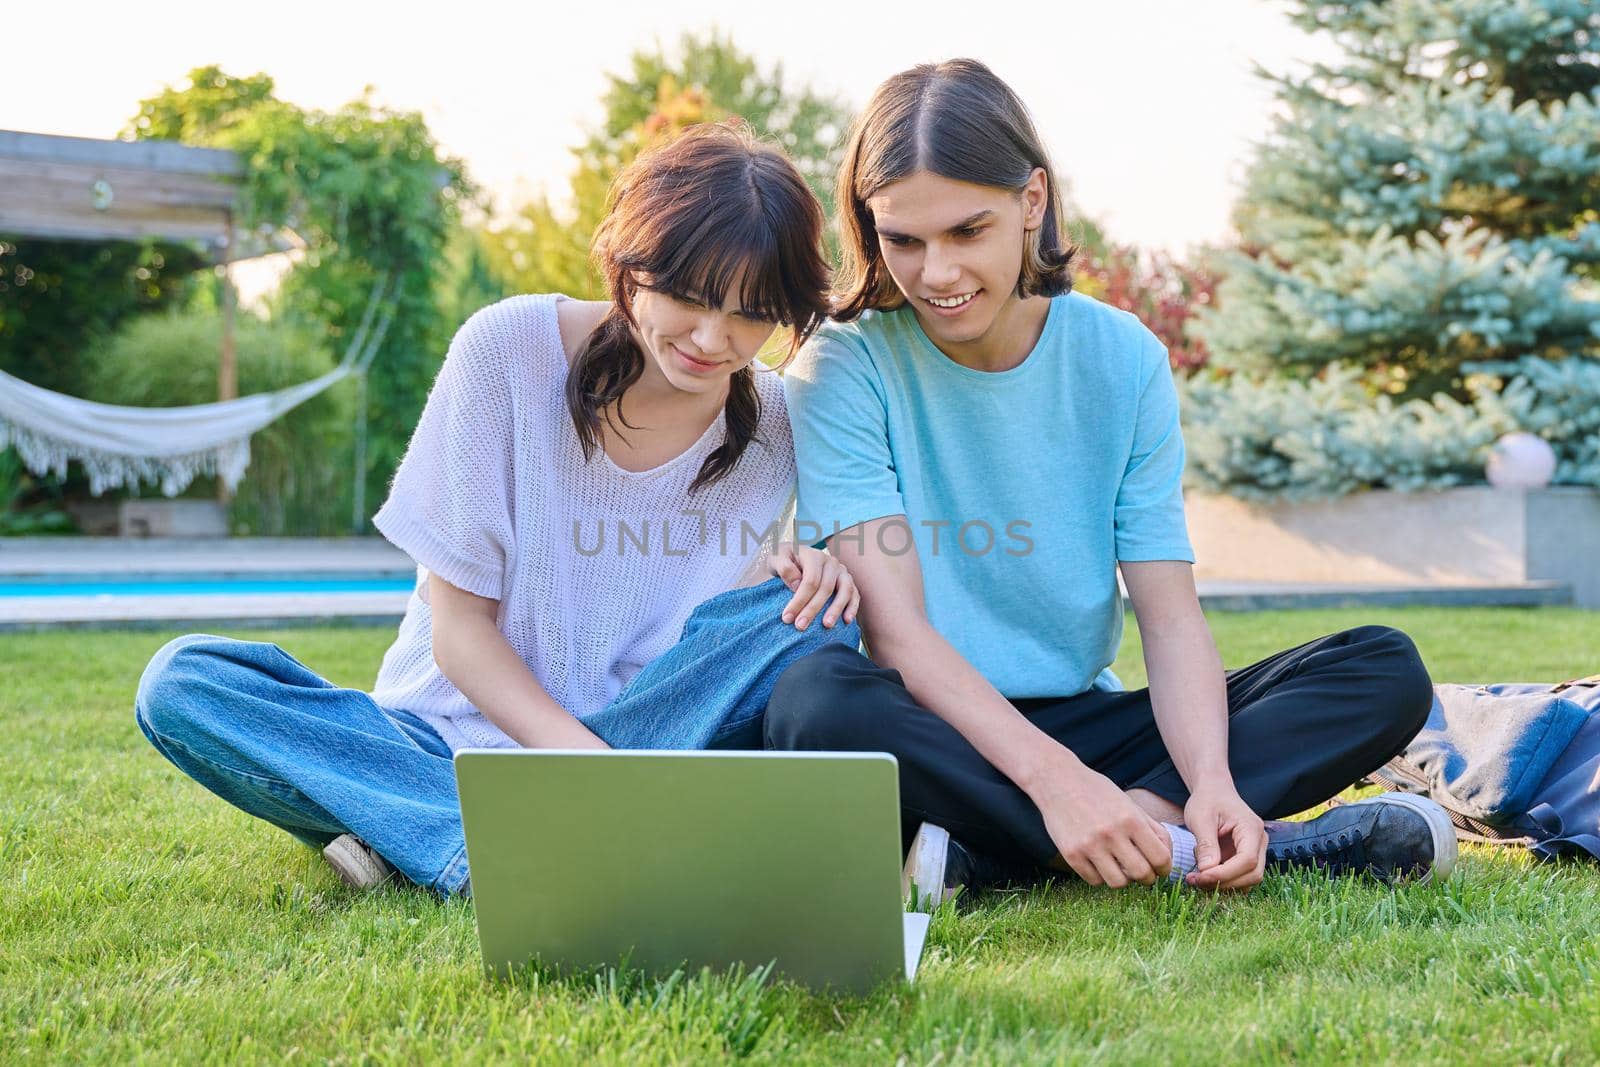 Two teenage friends of students sitting on grass with laptop, in backyard, guy and girl 18 years old study together. Friendship, youth, technology, high school, college, lifestyle concept